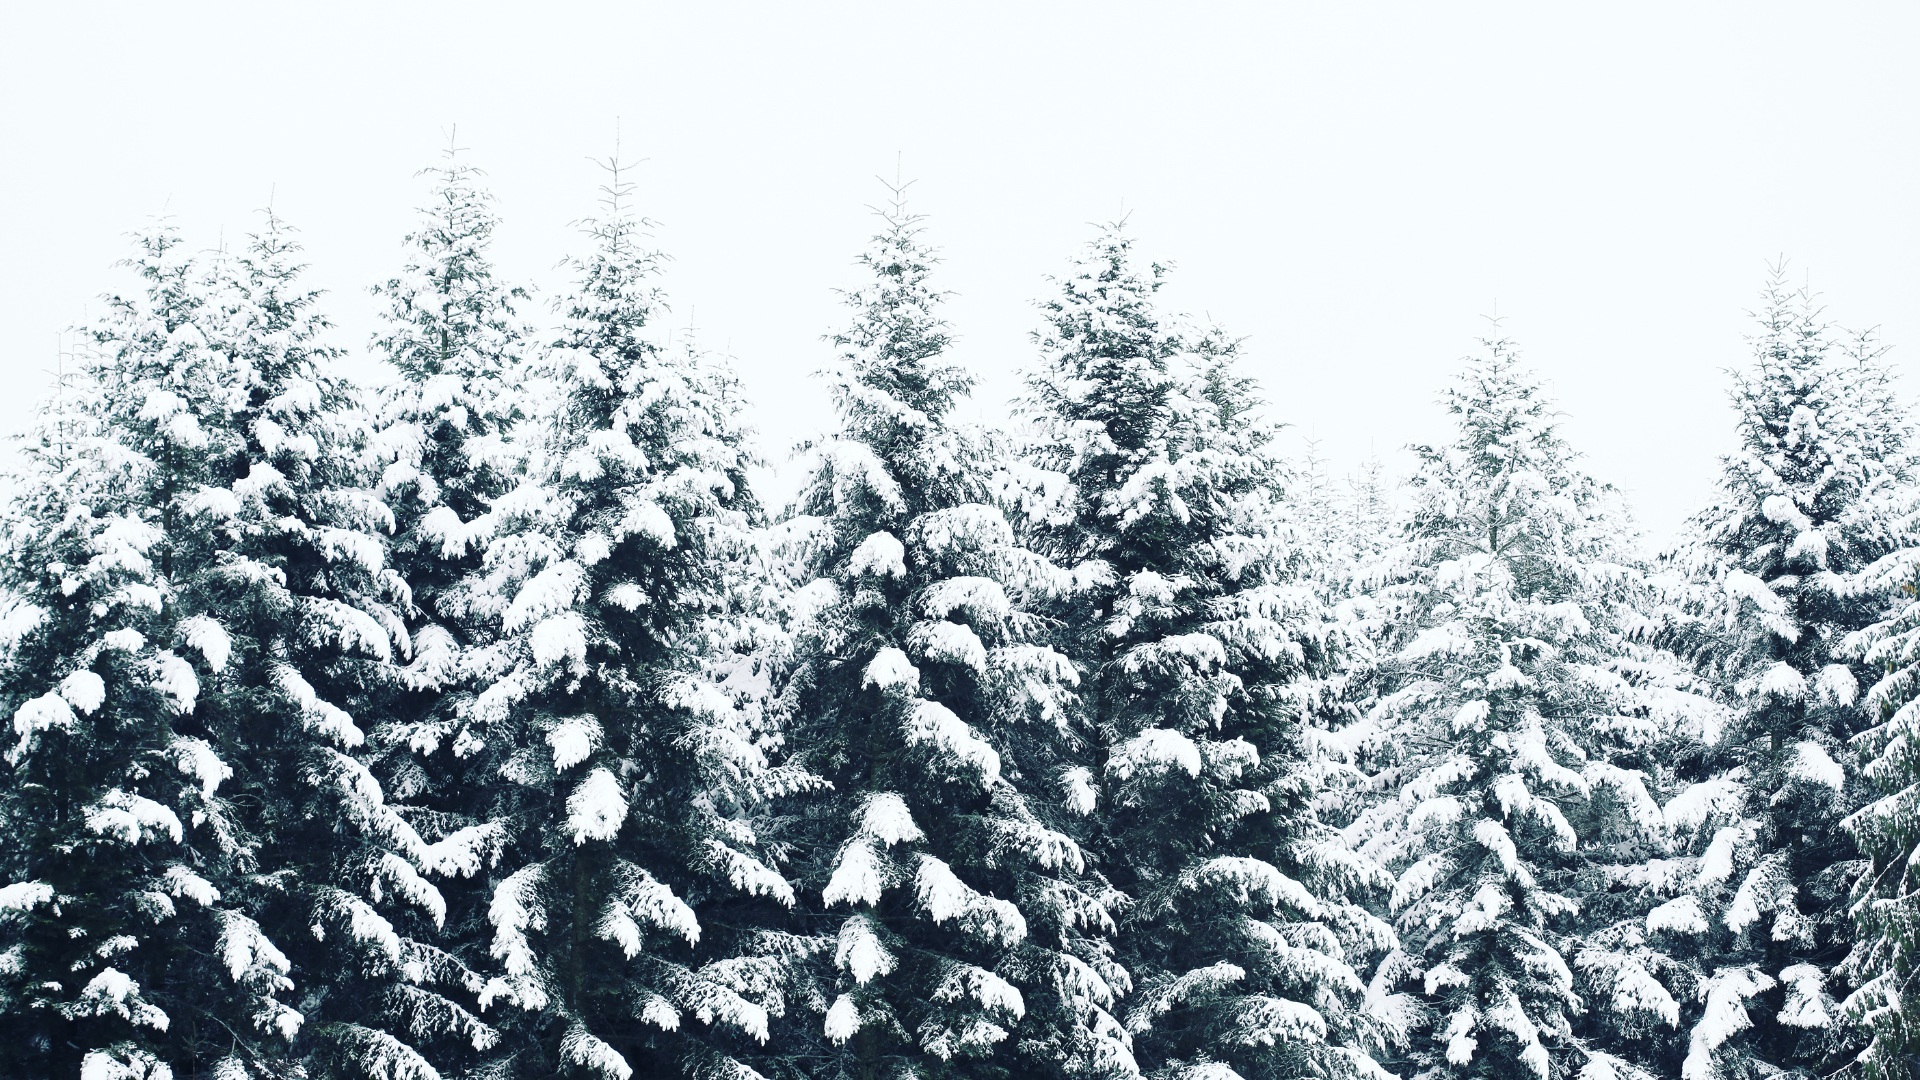 pine trees with snow